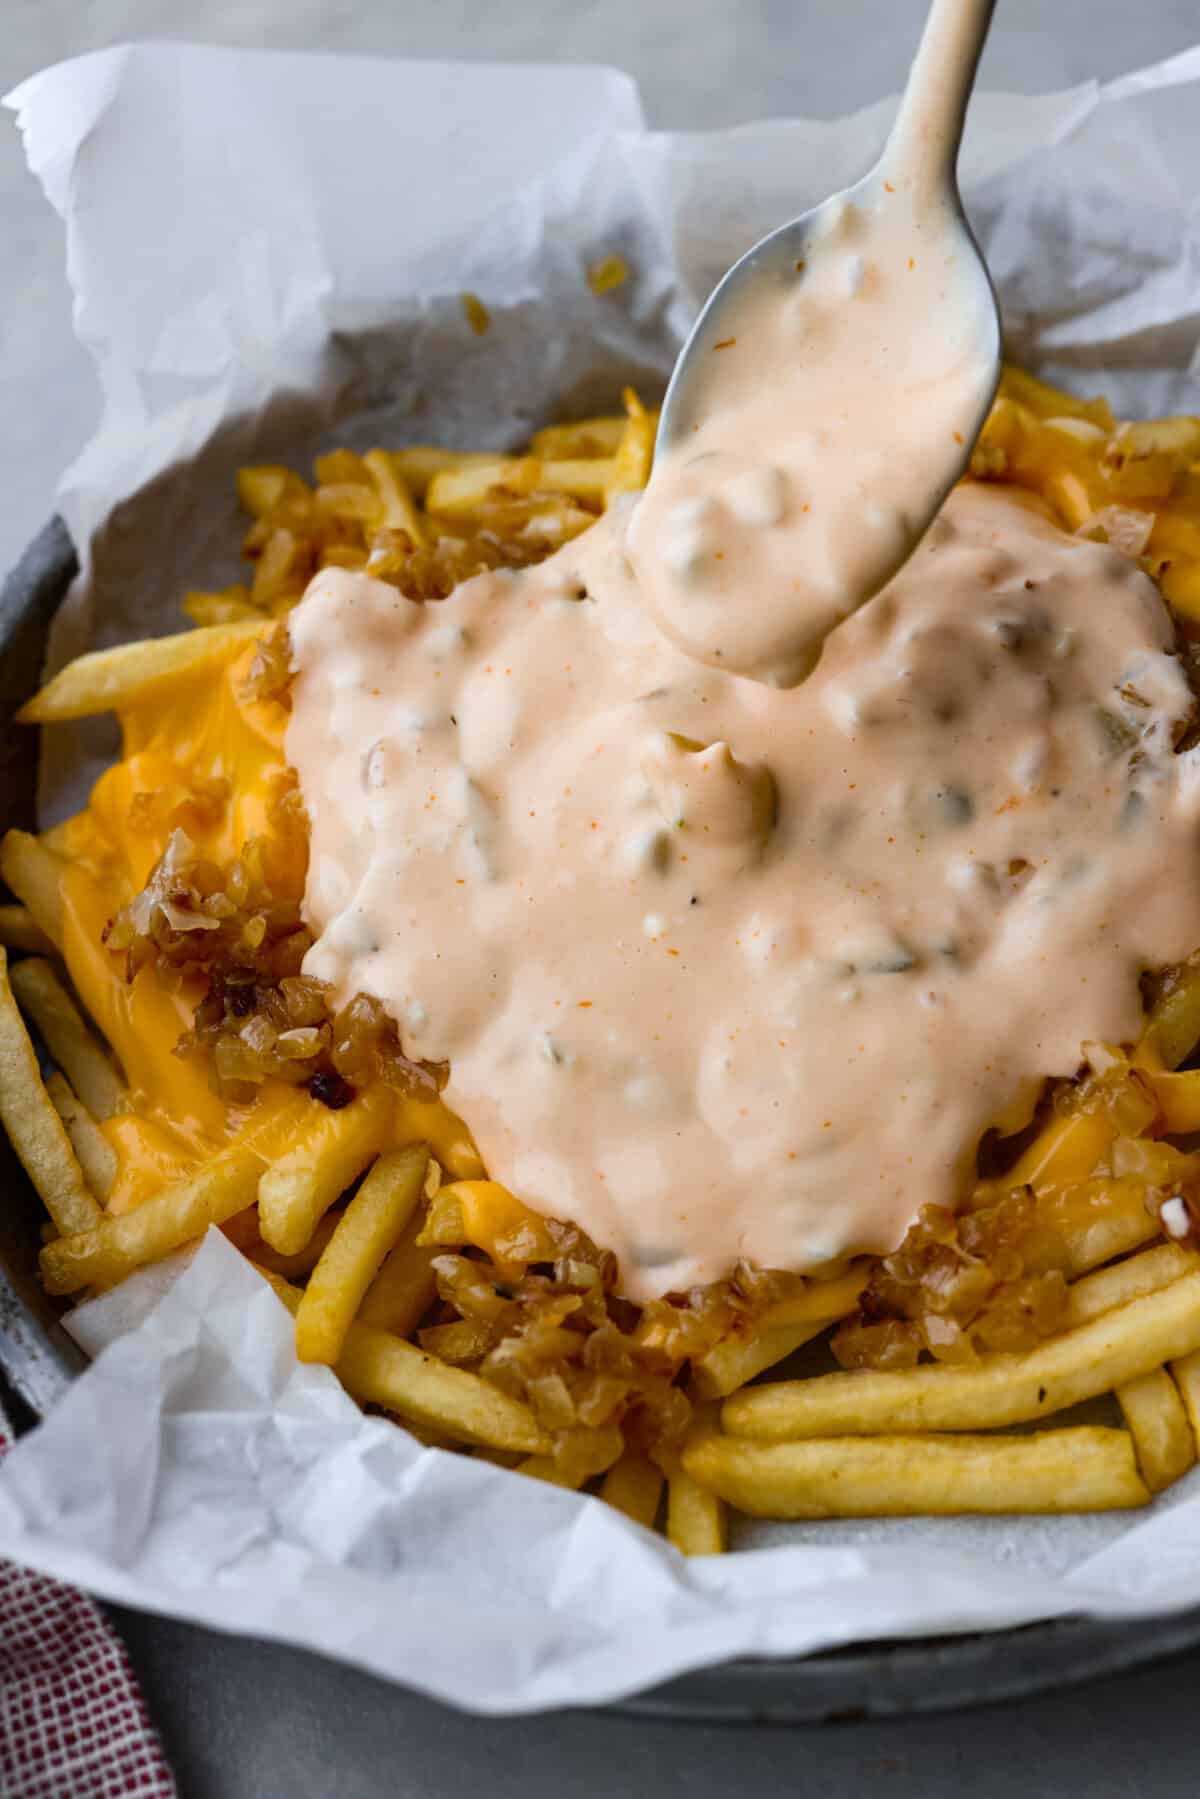 Spooning the zesty sauce over the animal fries.